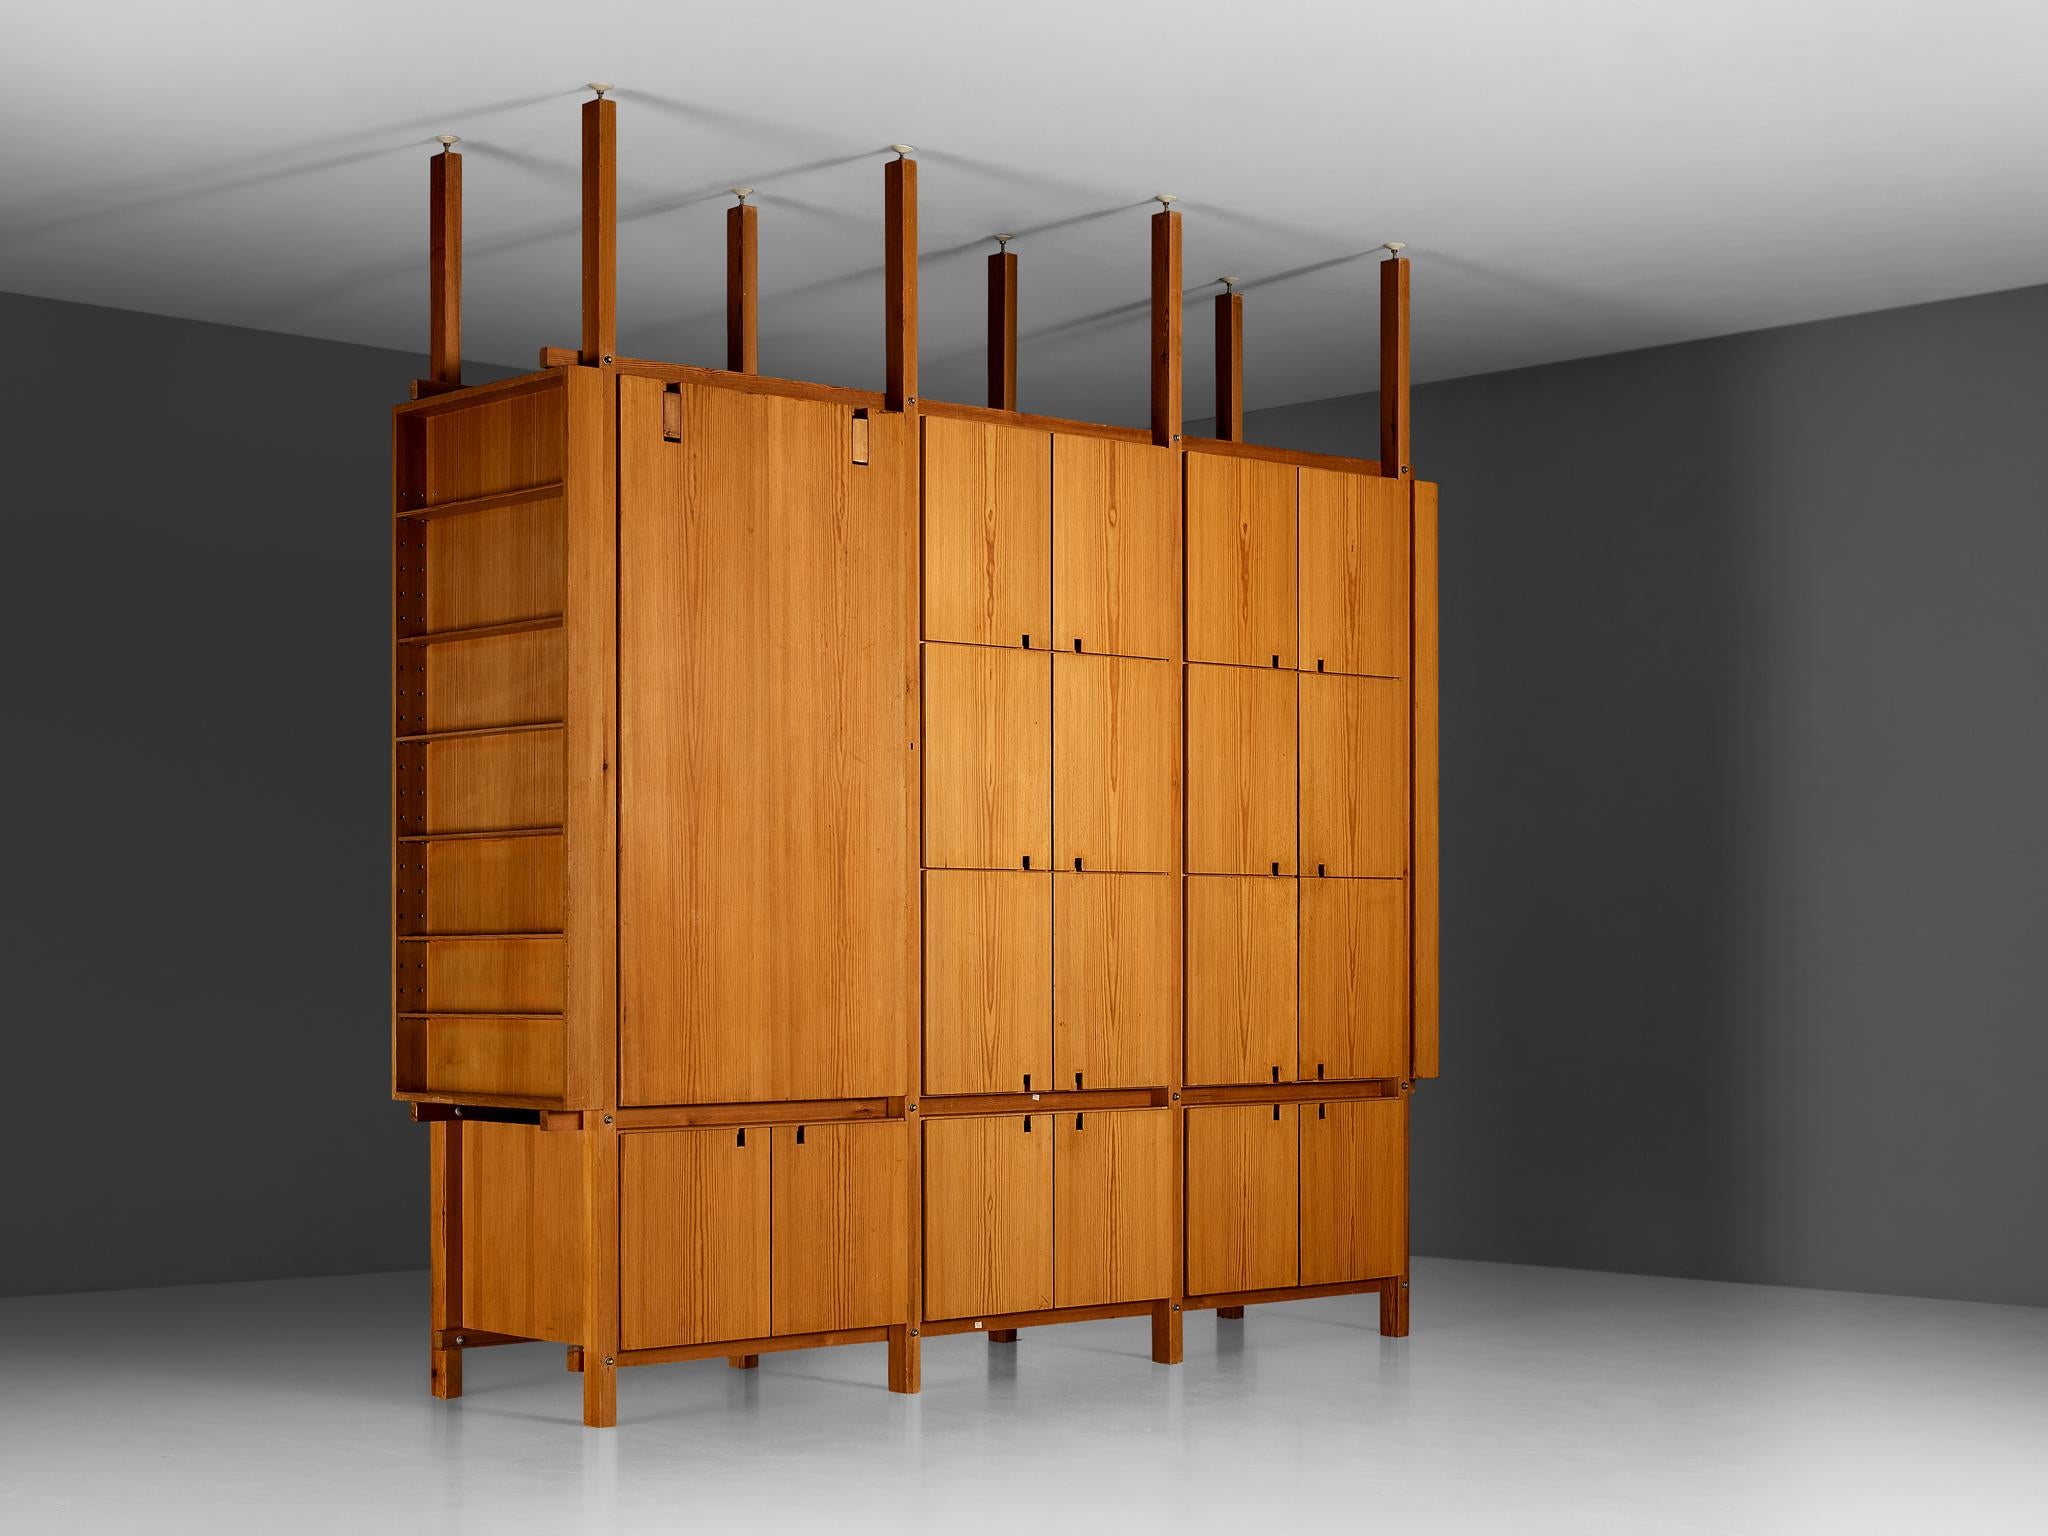 Monumental Wall Unit or Room Divider In Pine